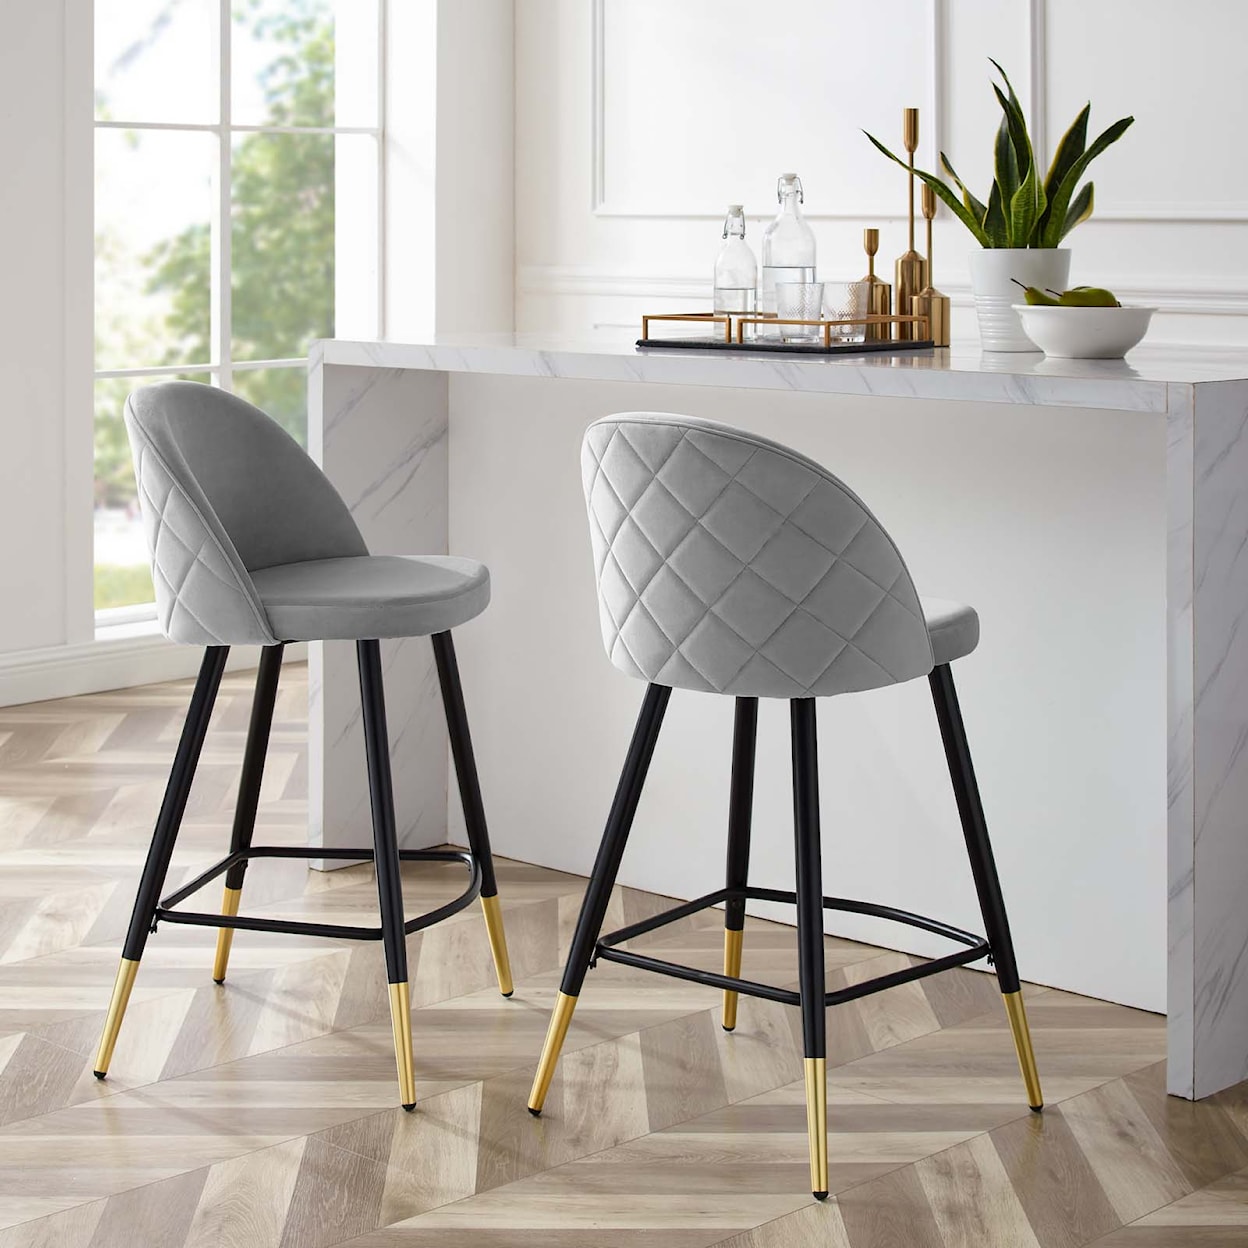 Modway Cordial Counter Stools